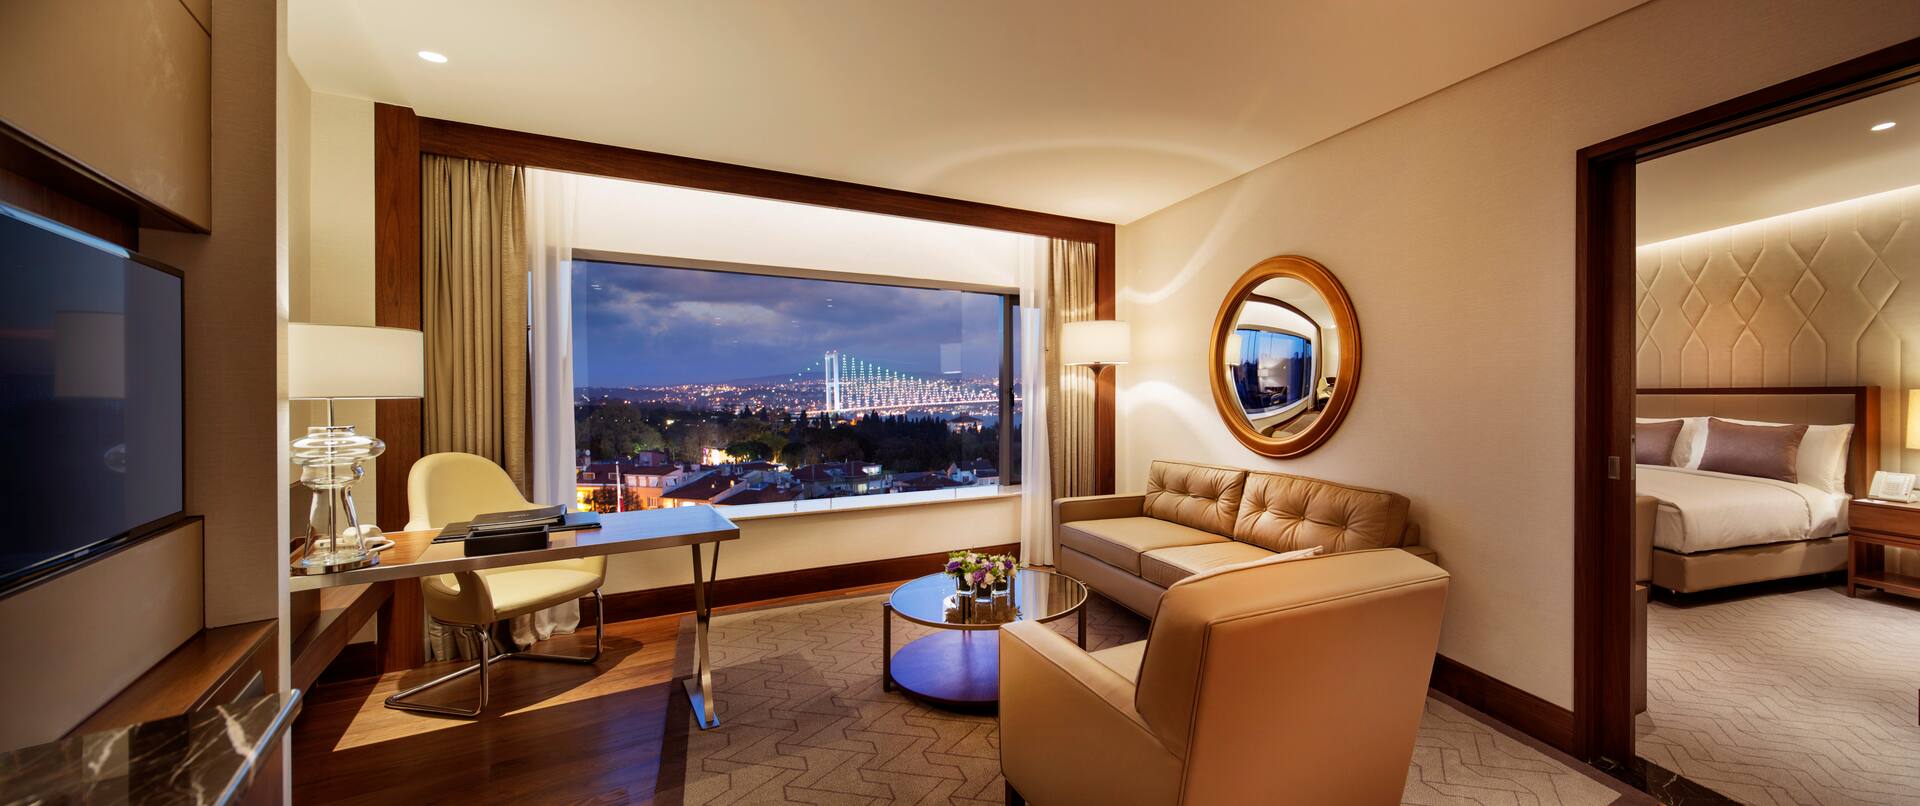 Bosphorus Suite Living Area with City View